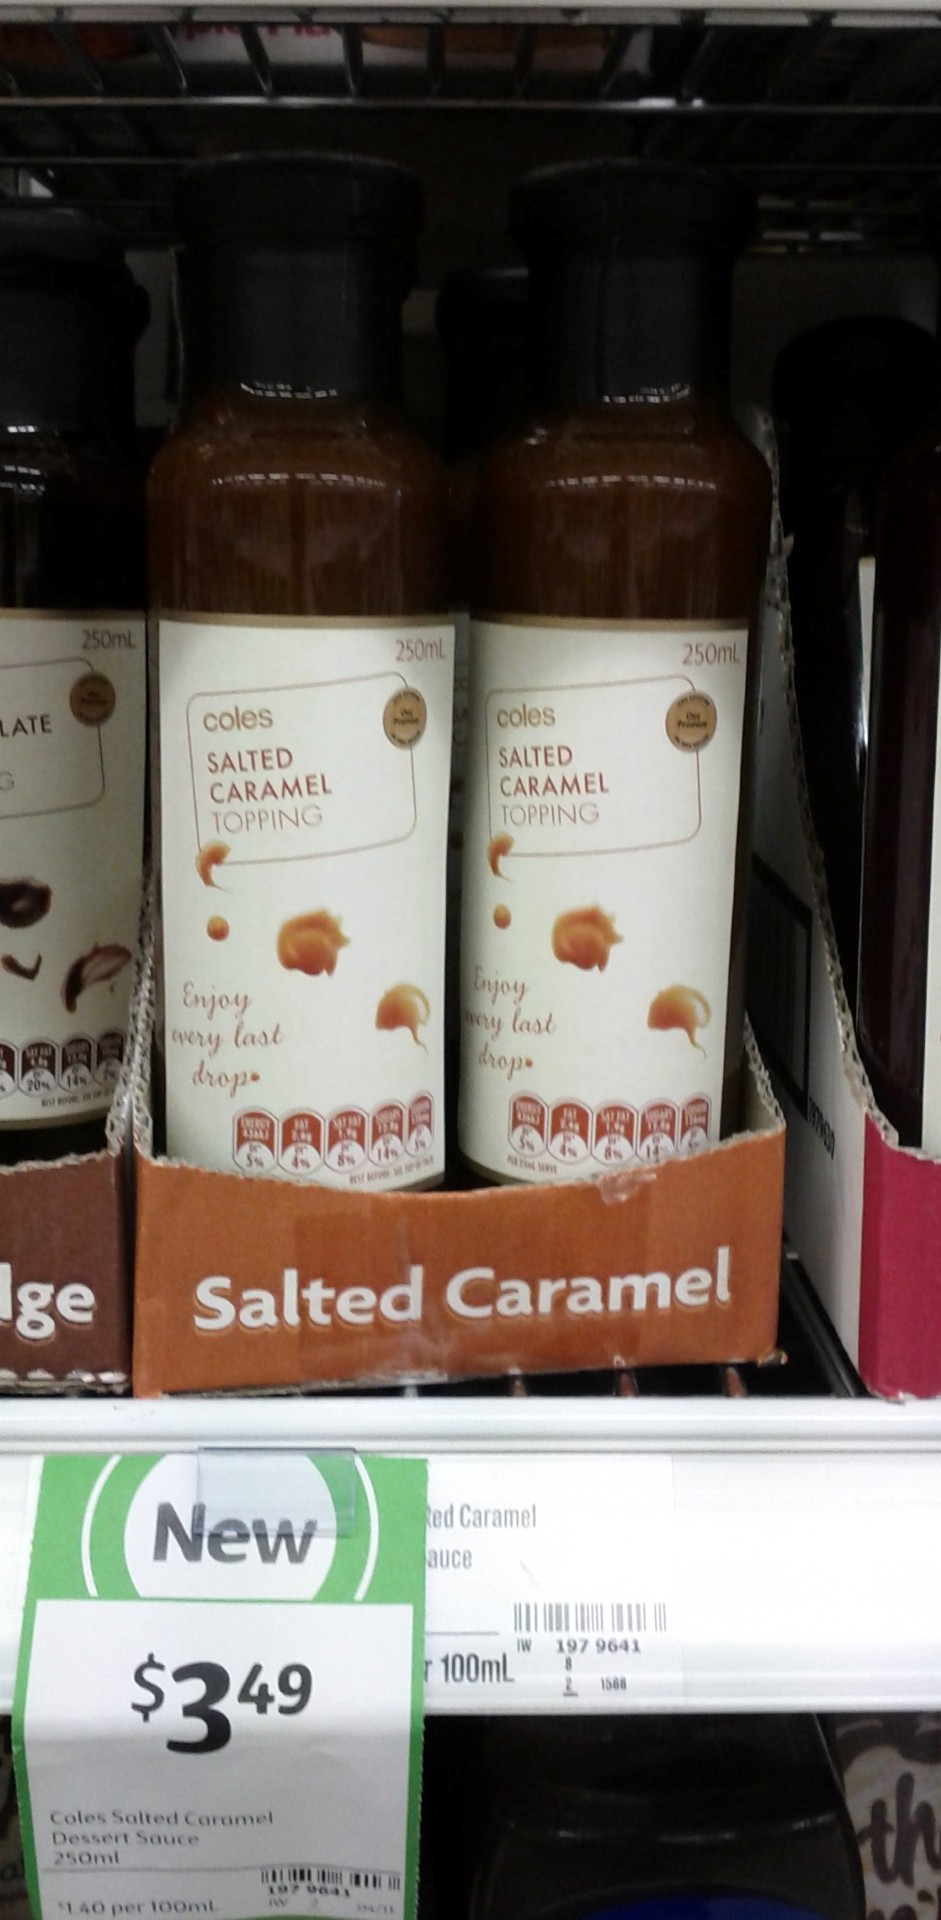 Coles 250mL Salted Caramel Topping